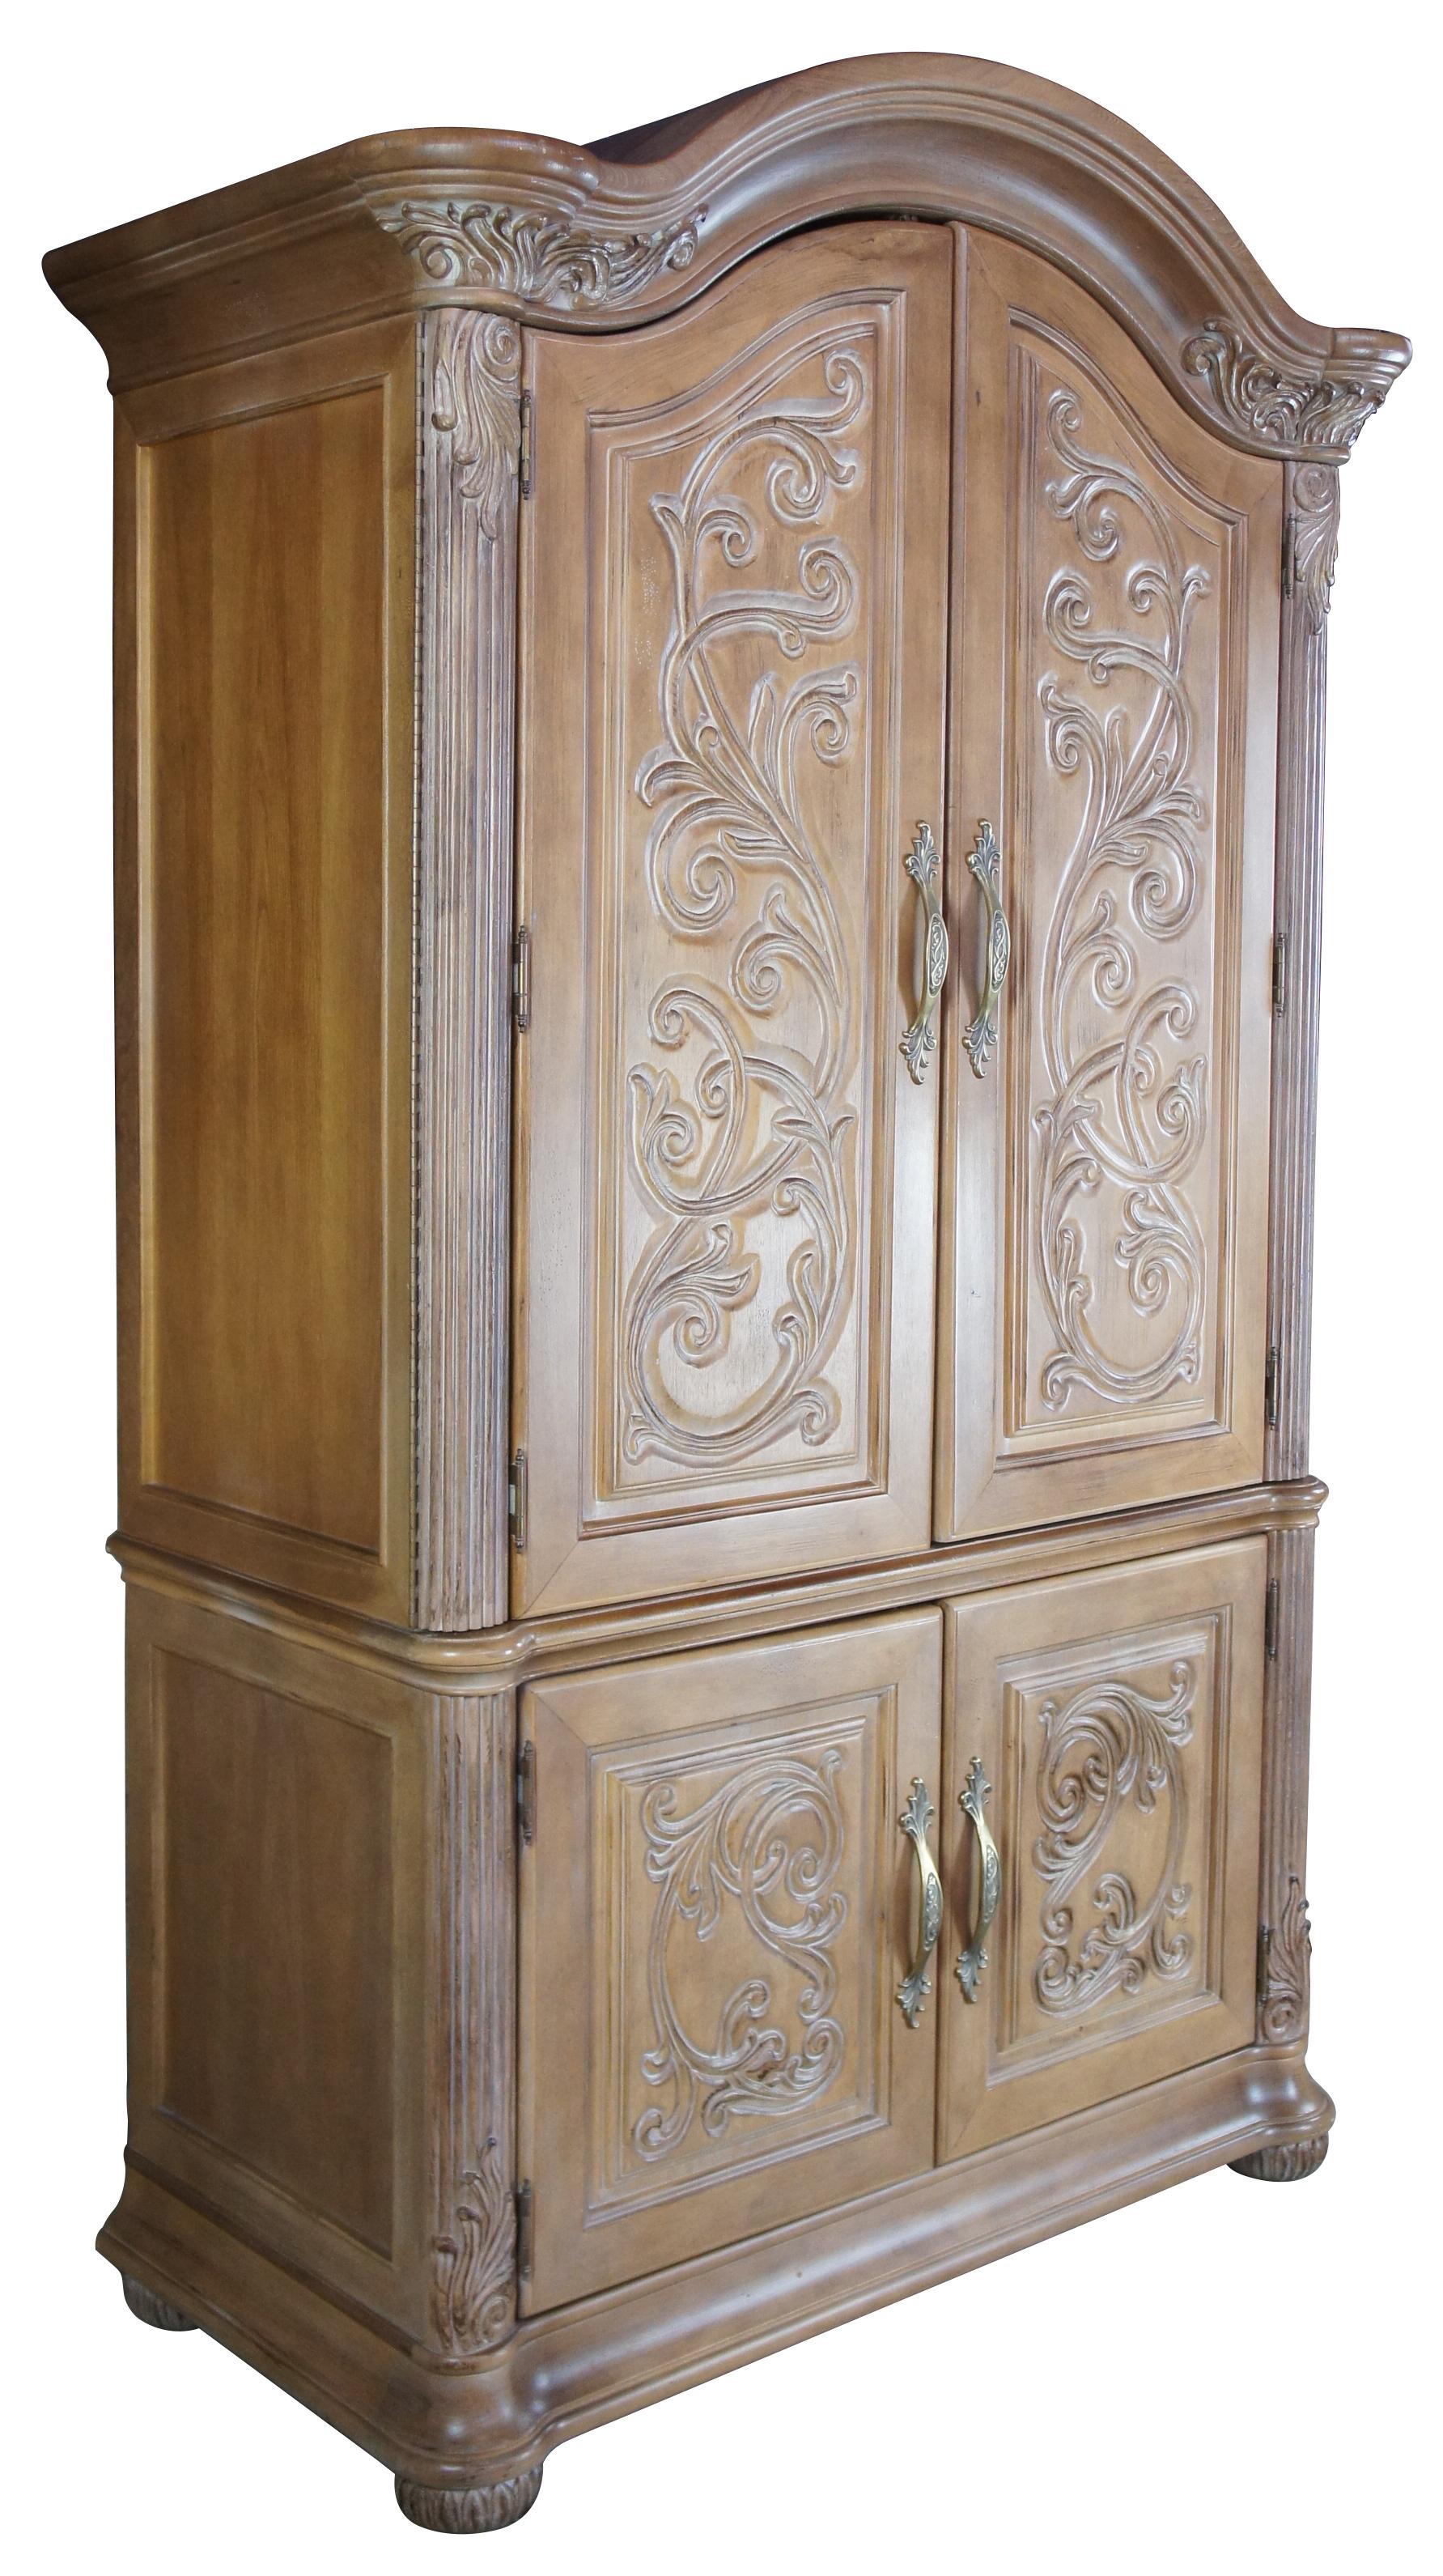 Vintage Bernhardt armoire. Made of oak featuring a reeded column design with acanthus relief. Includes a raised crown, inner drawers for storage and a double hinging door with mirrors along the insides.

Measures: Interior - 45.5